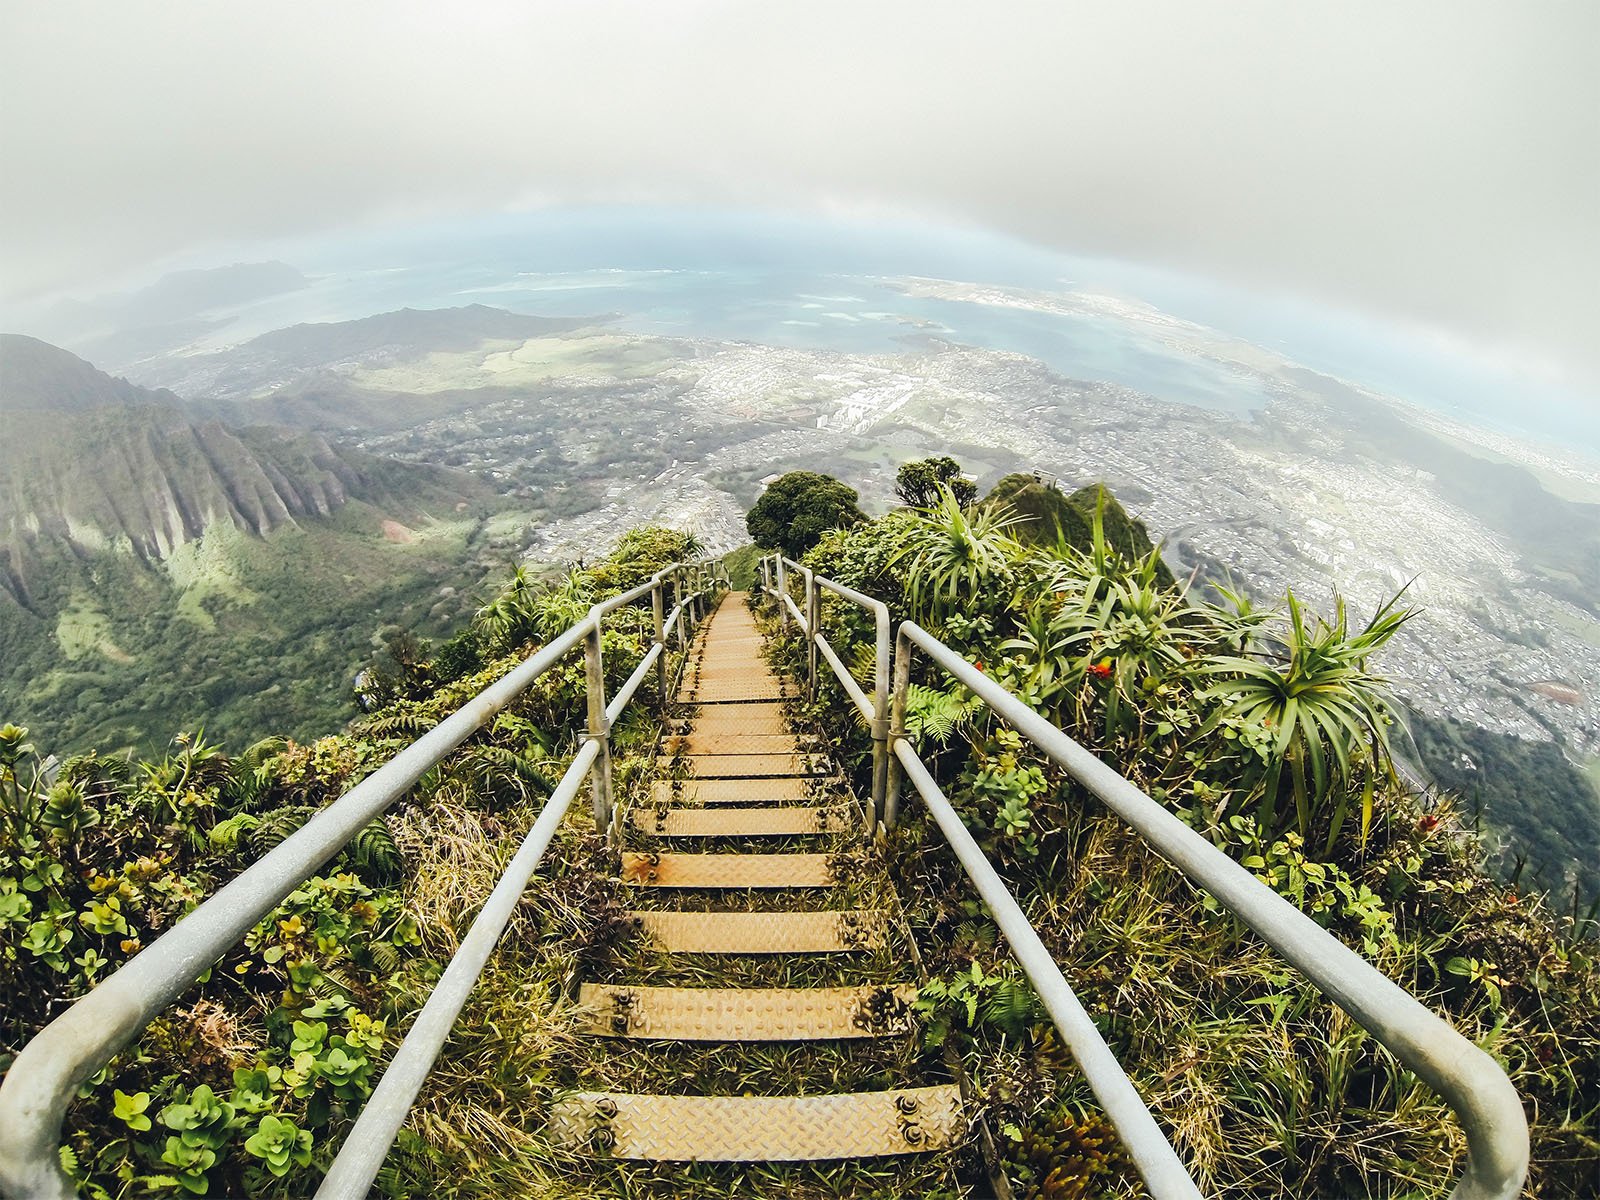 A wide-angle view from the top of a mountain staircase descending into a lush landscape with coastal views, urban areas, and overcast skies.